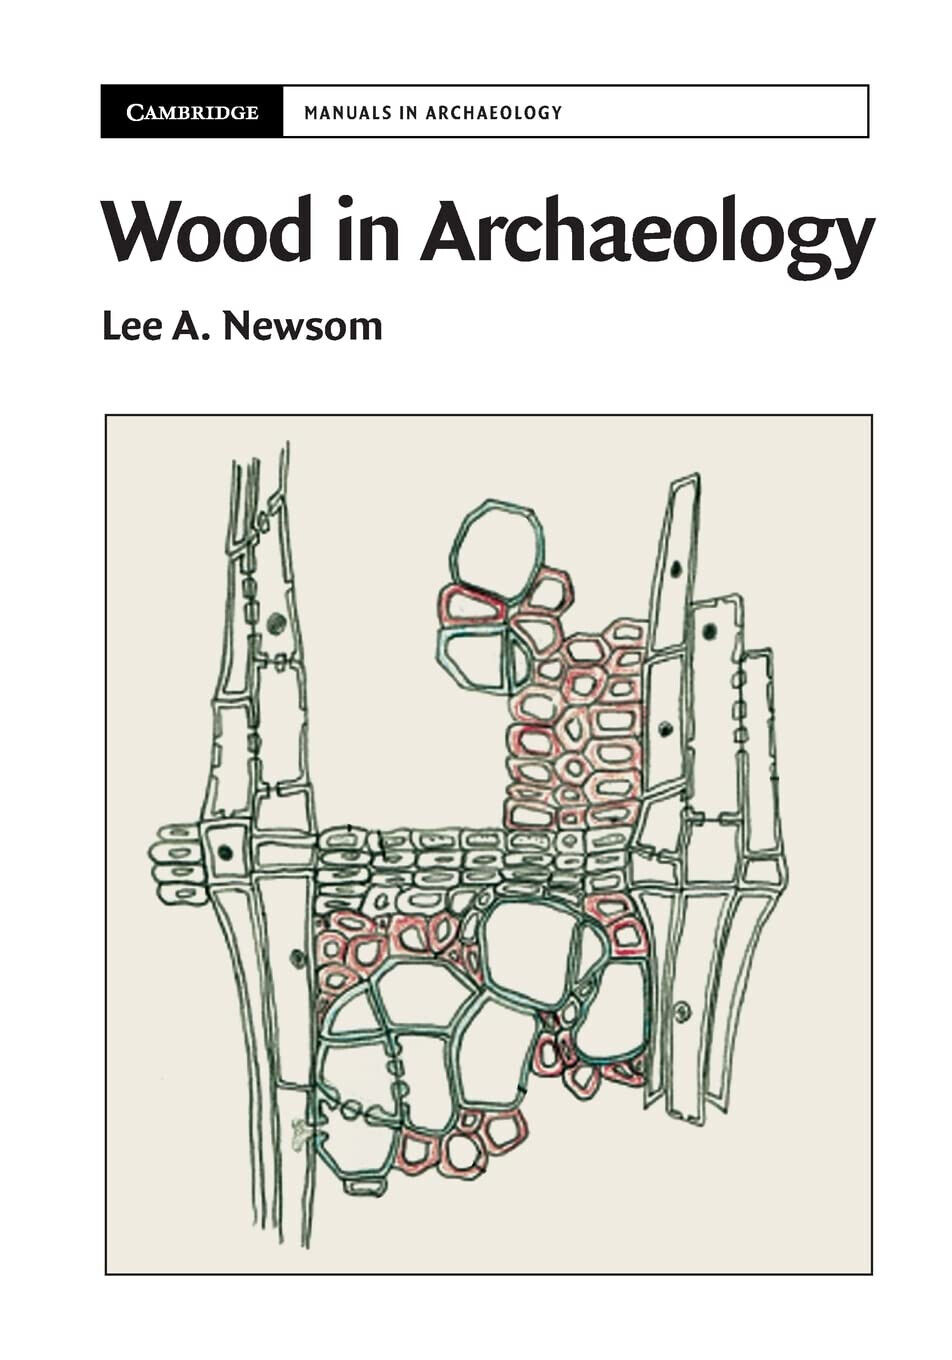 Wood In Archaeology - Lee A. Newsom - Cambrigde, 2022